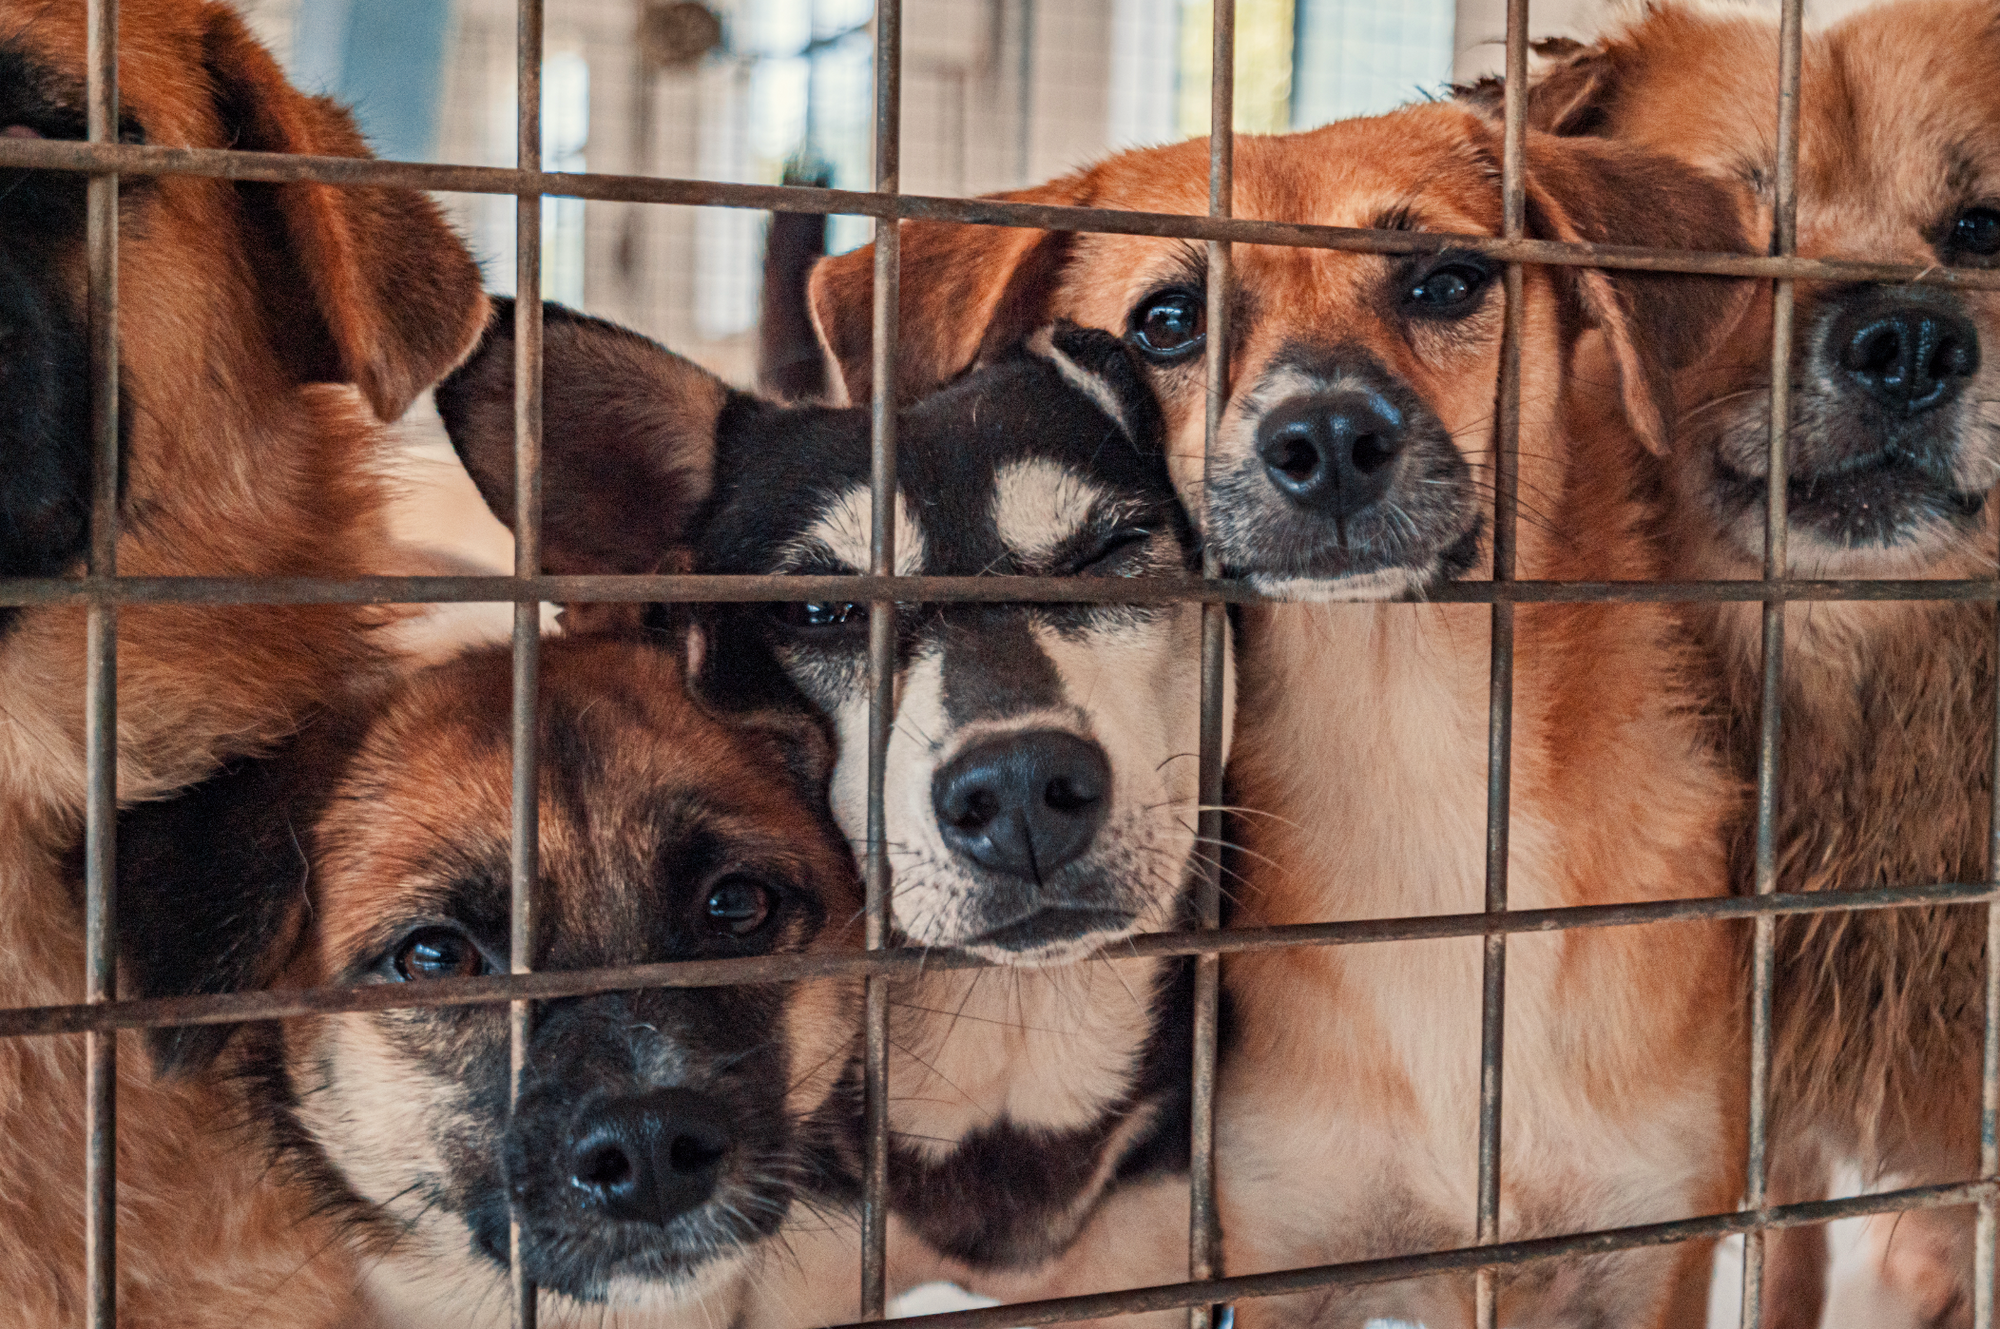 Dogs peeking through a fence at an animal shelter.